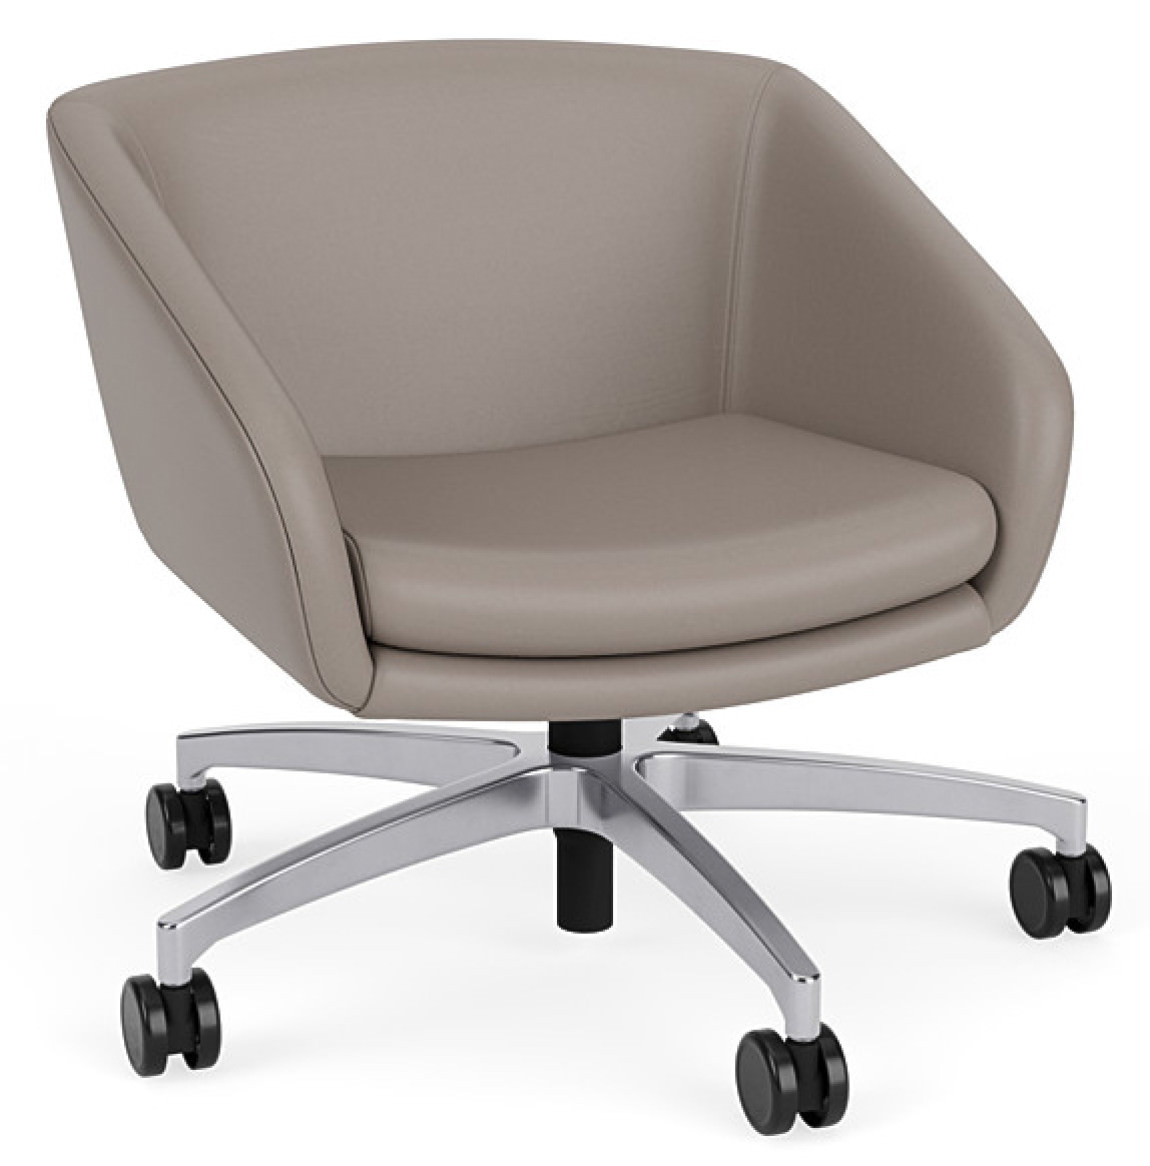 Vinyl Conference Room Swivel Chair